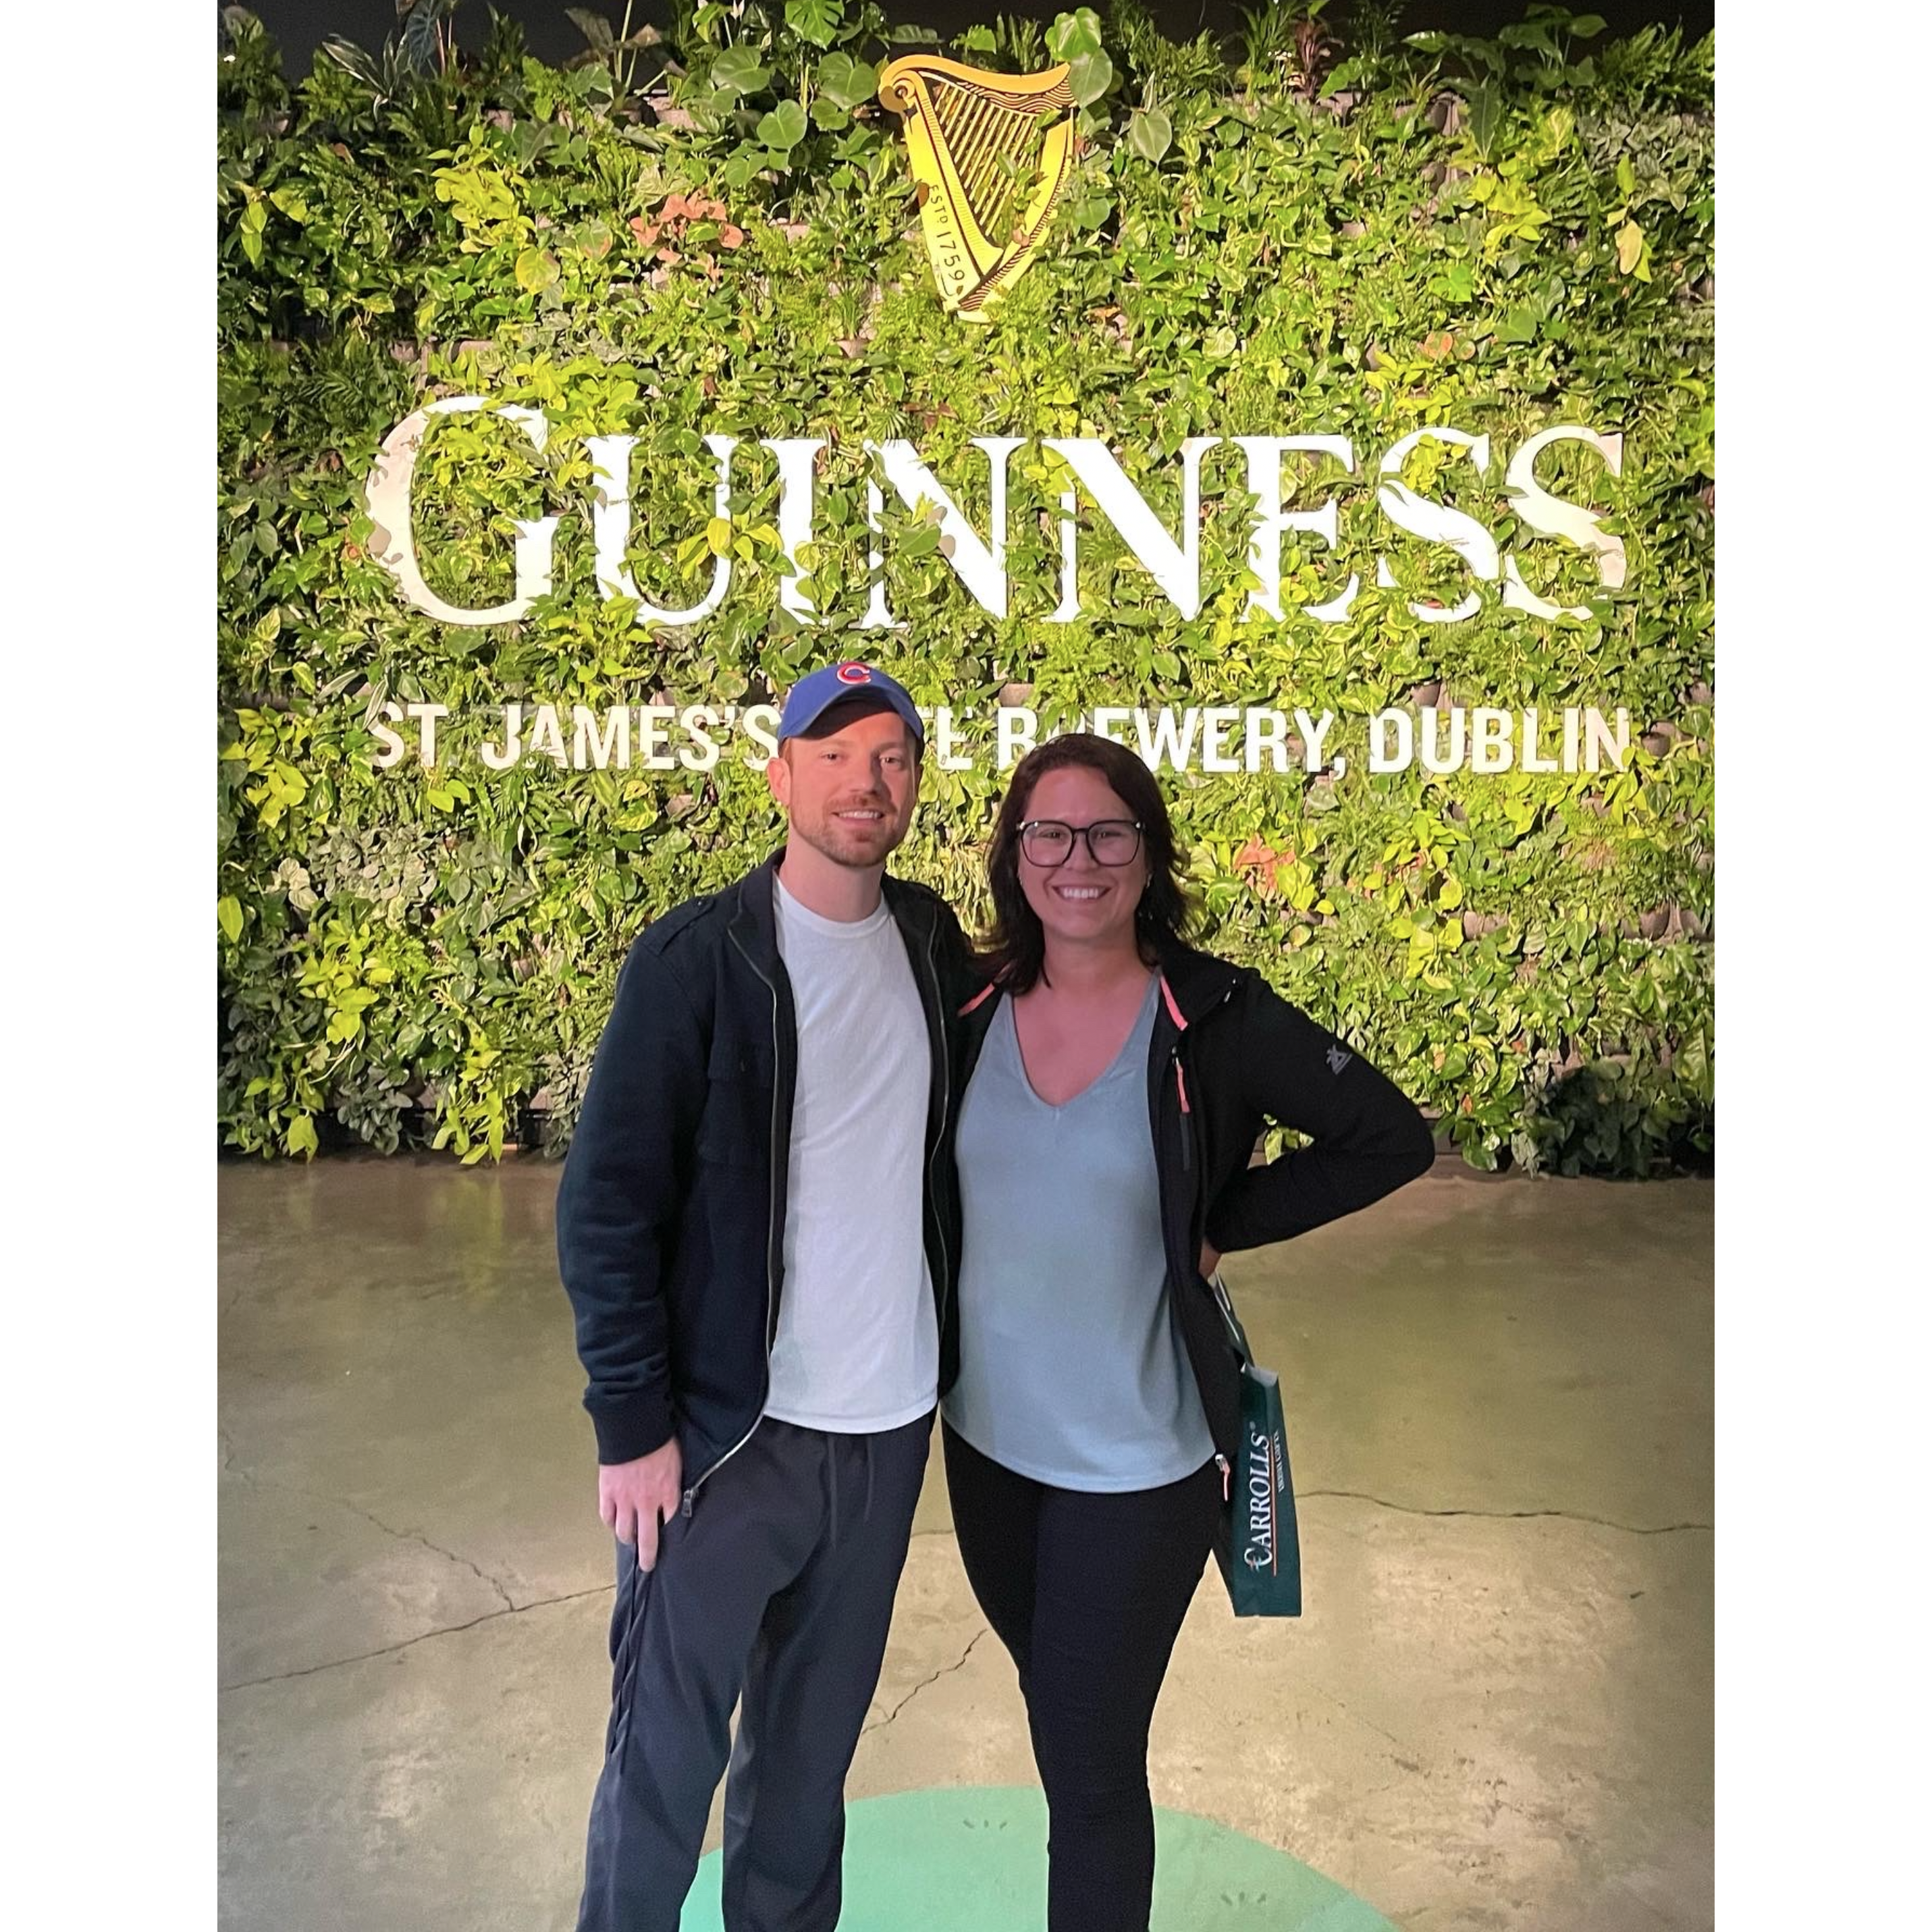 At the Guinness brewery, Dublin, Ireland